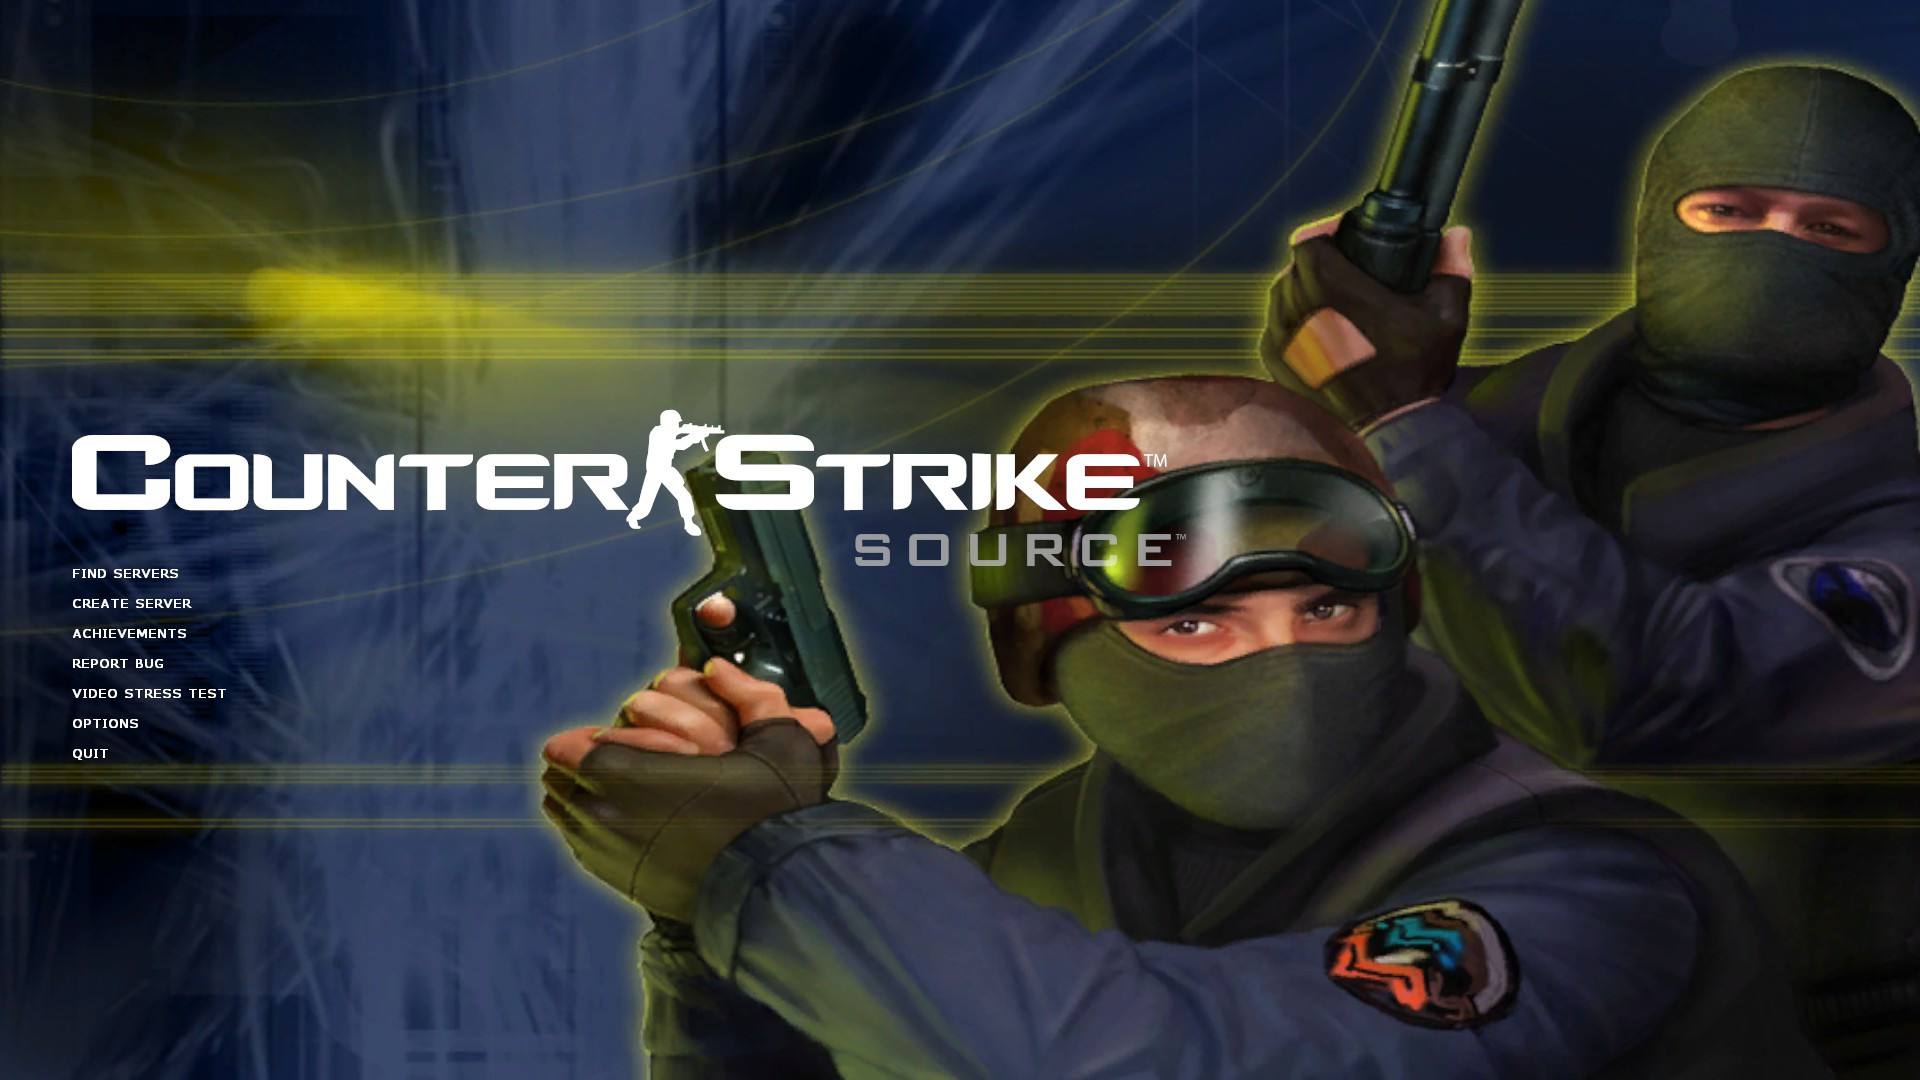 download counter strike source content for gmod